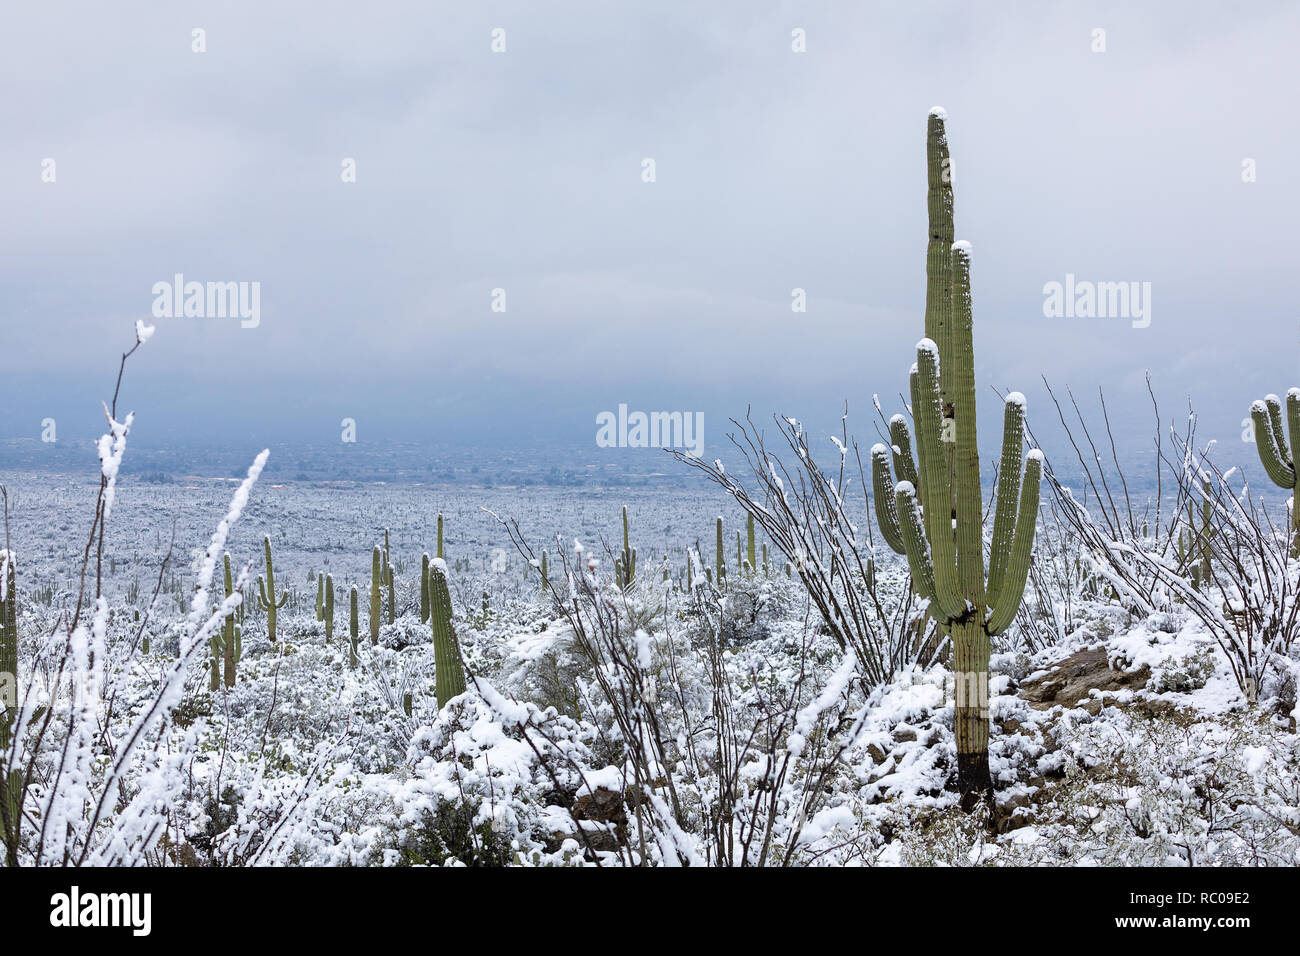 Saguaro cacti covered with snow in a desert landscape in Saguaro National Park East, Tucson, Arizona Stock Photo